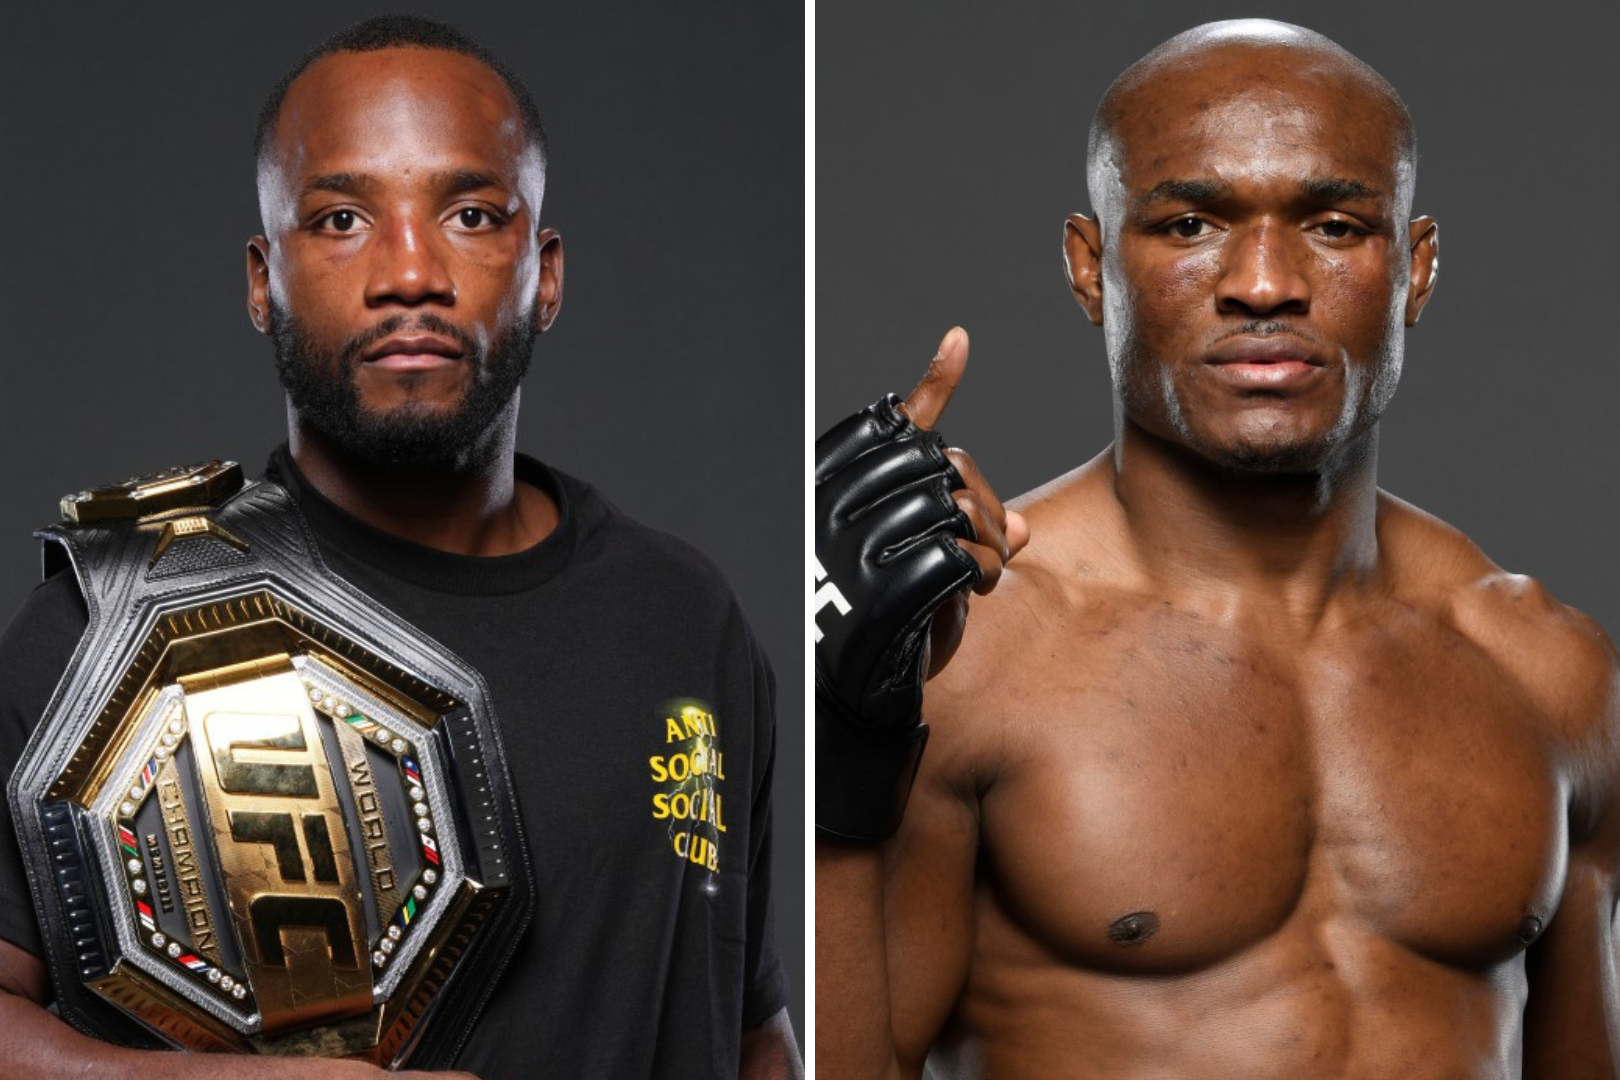 Leon Edwards vs Kamaru Usman III: Preview, Where to Watch and Betting Odds